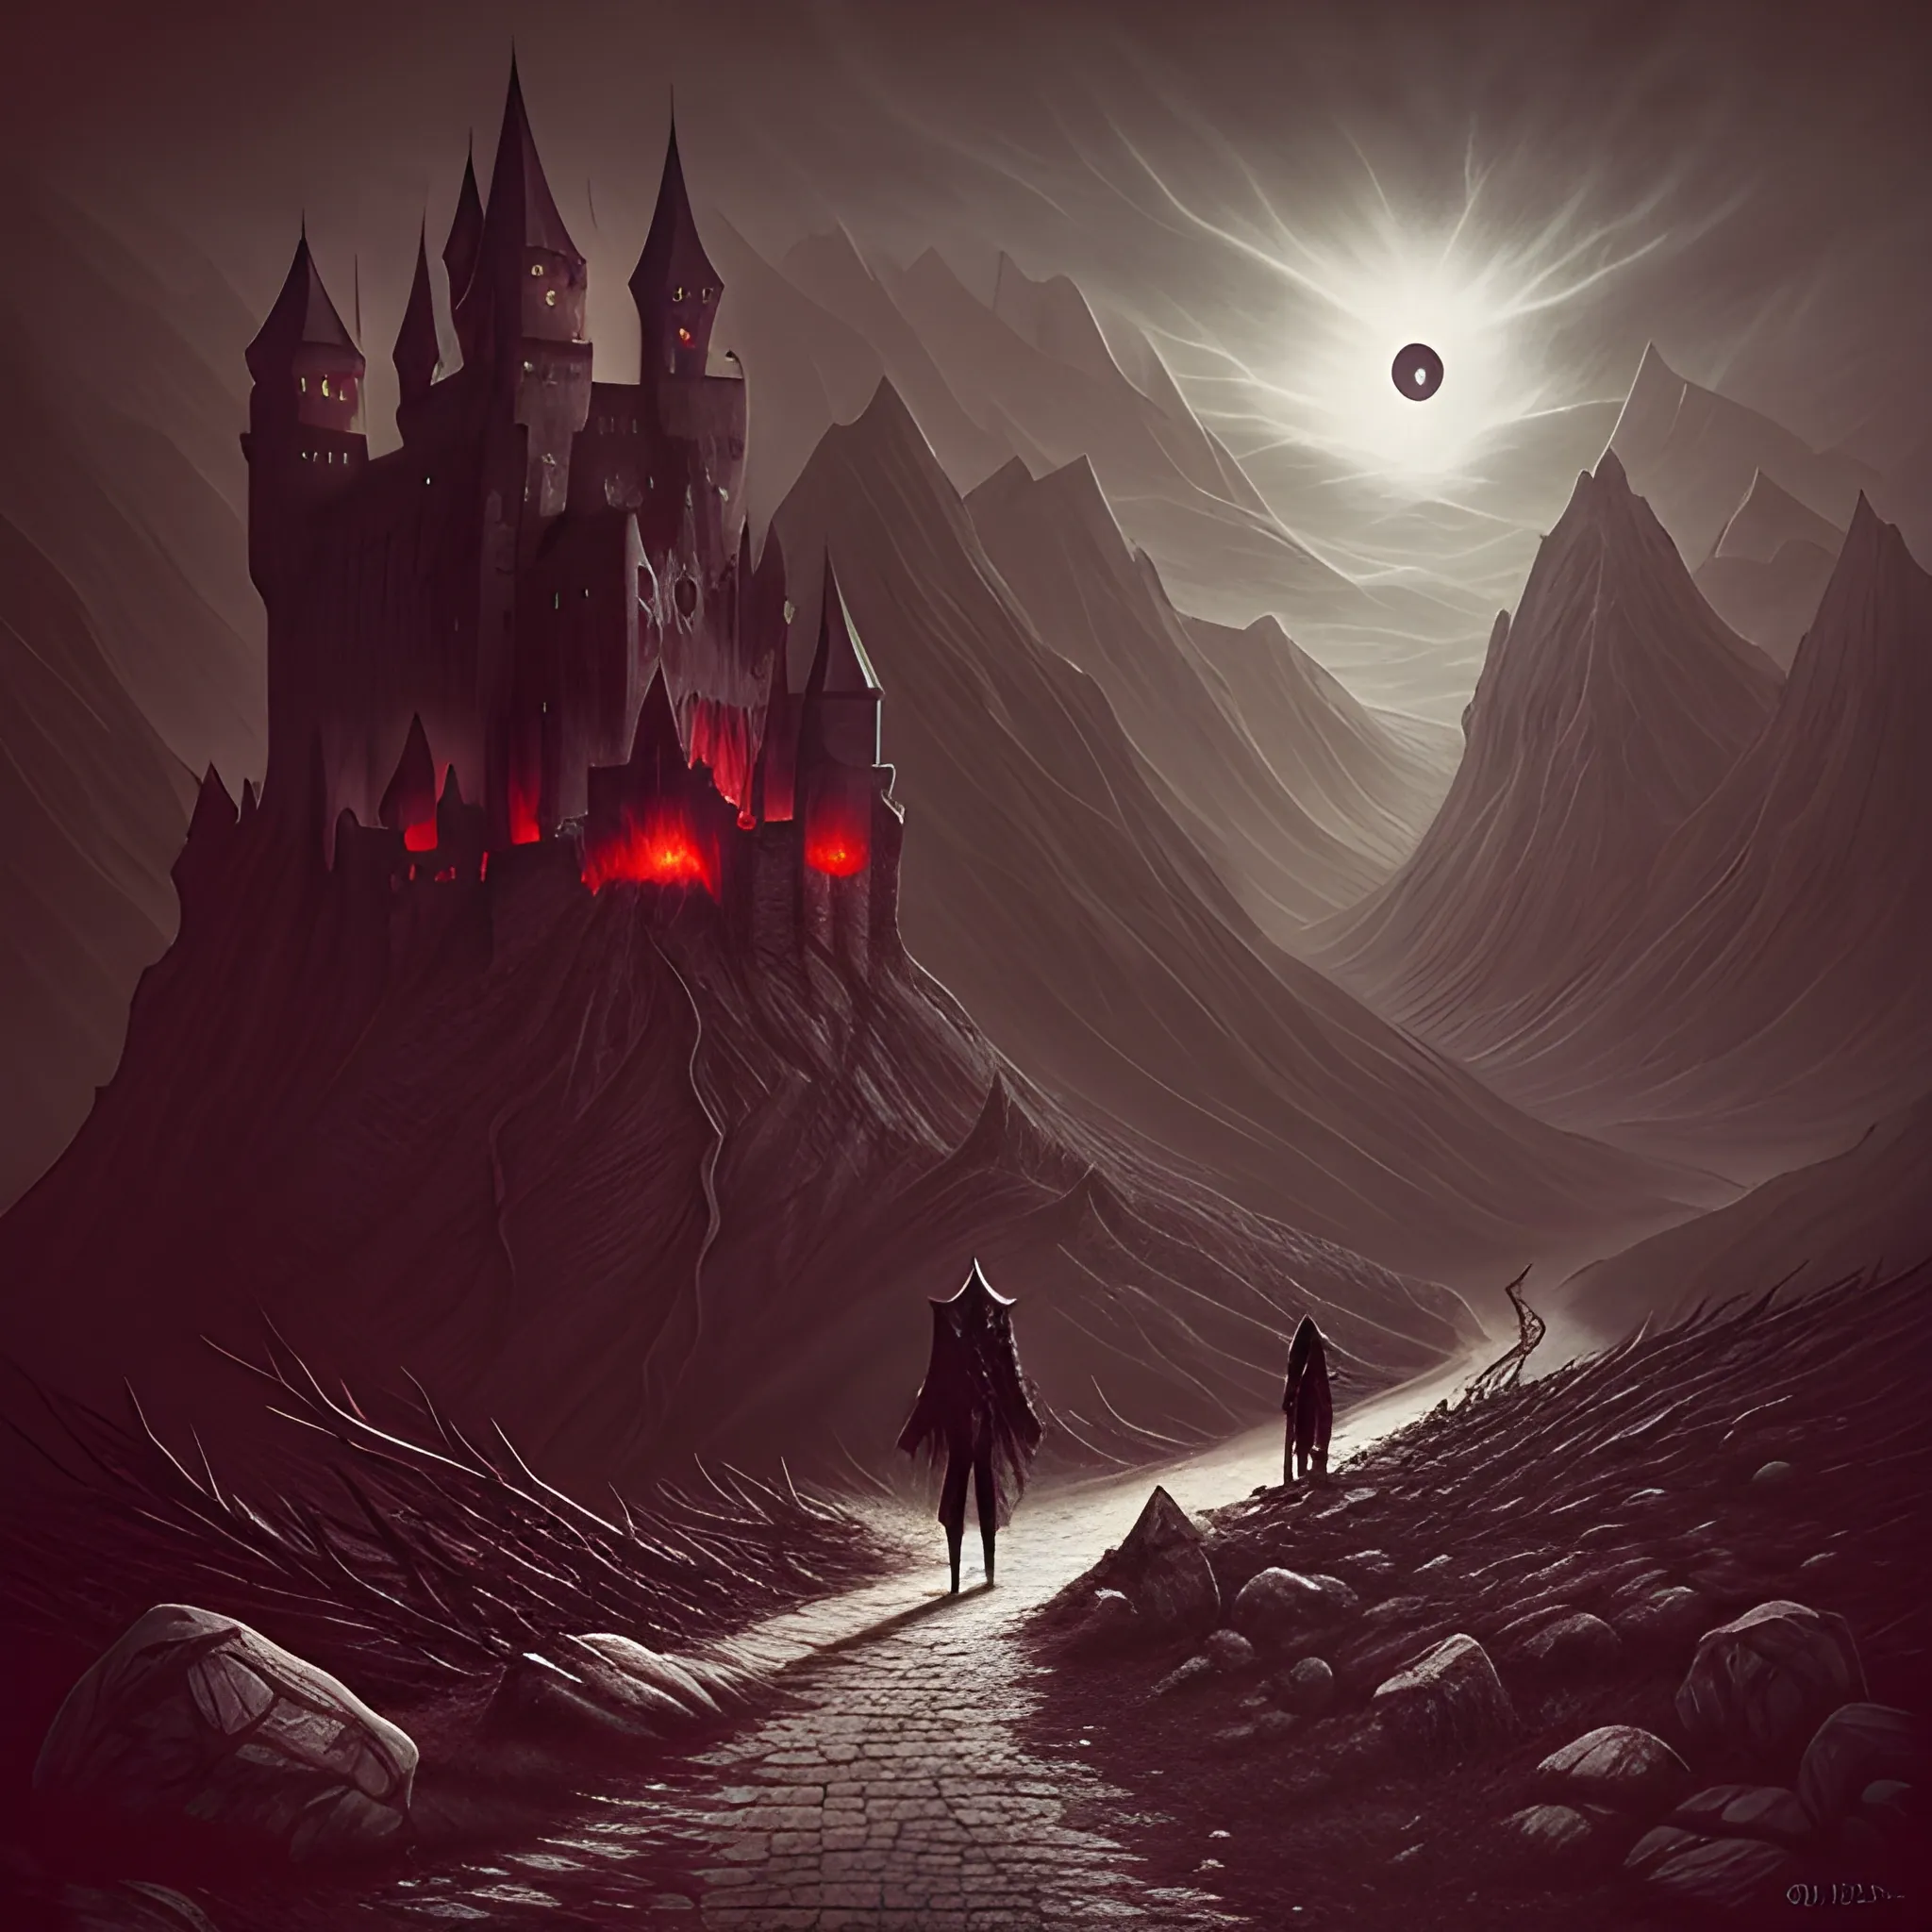 dark fantasy art, satanist walking, mountain pass, mountain range, medieval, dark red sky, a river of blood, dead trees, atmospheric aesthetic, surrealism, surrealistic, grim, old ruins, darkness, castle ruins on a mountain, skeletons, world